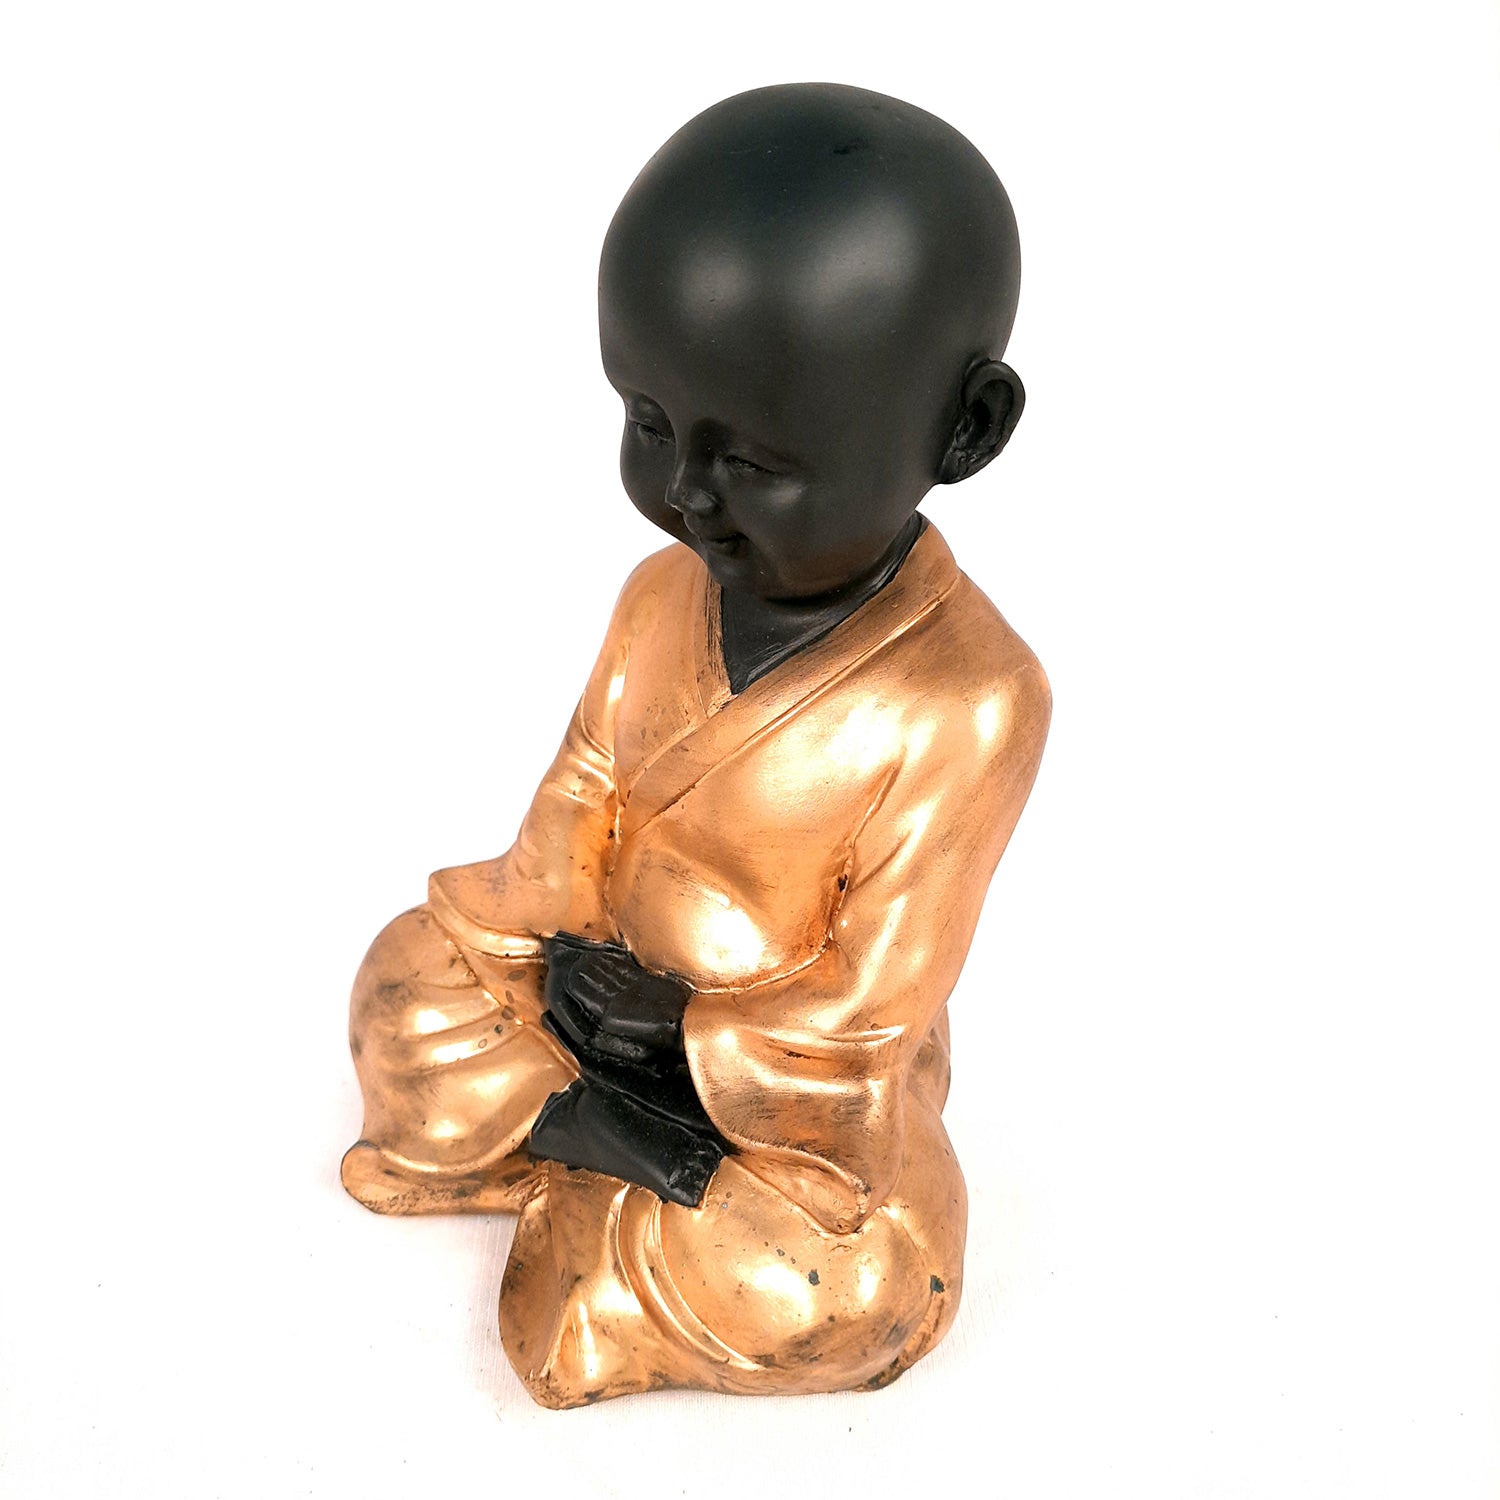 Baby Monk Showpiece with Rustic Look | Feng Shui Decor - For Good Luck, Home, Table, Office Decor & Gift - 7 Inch - apkamart